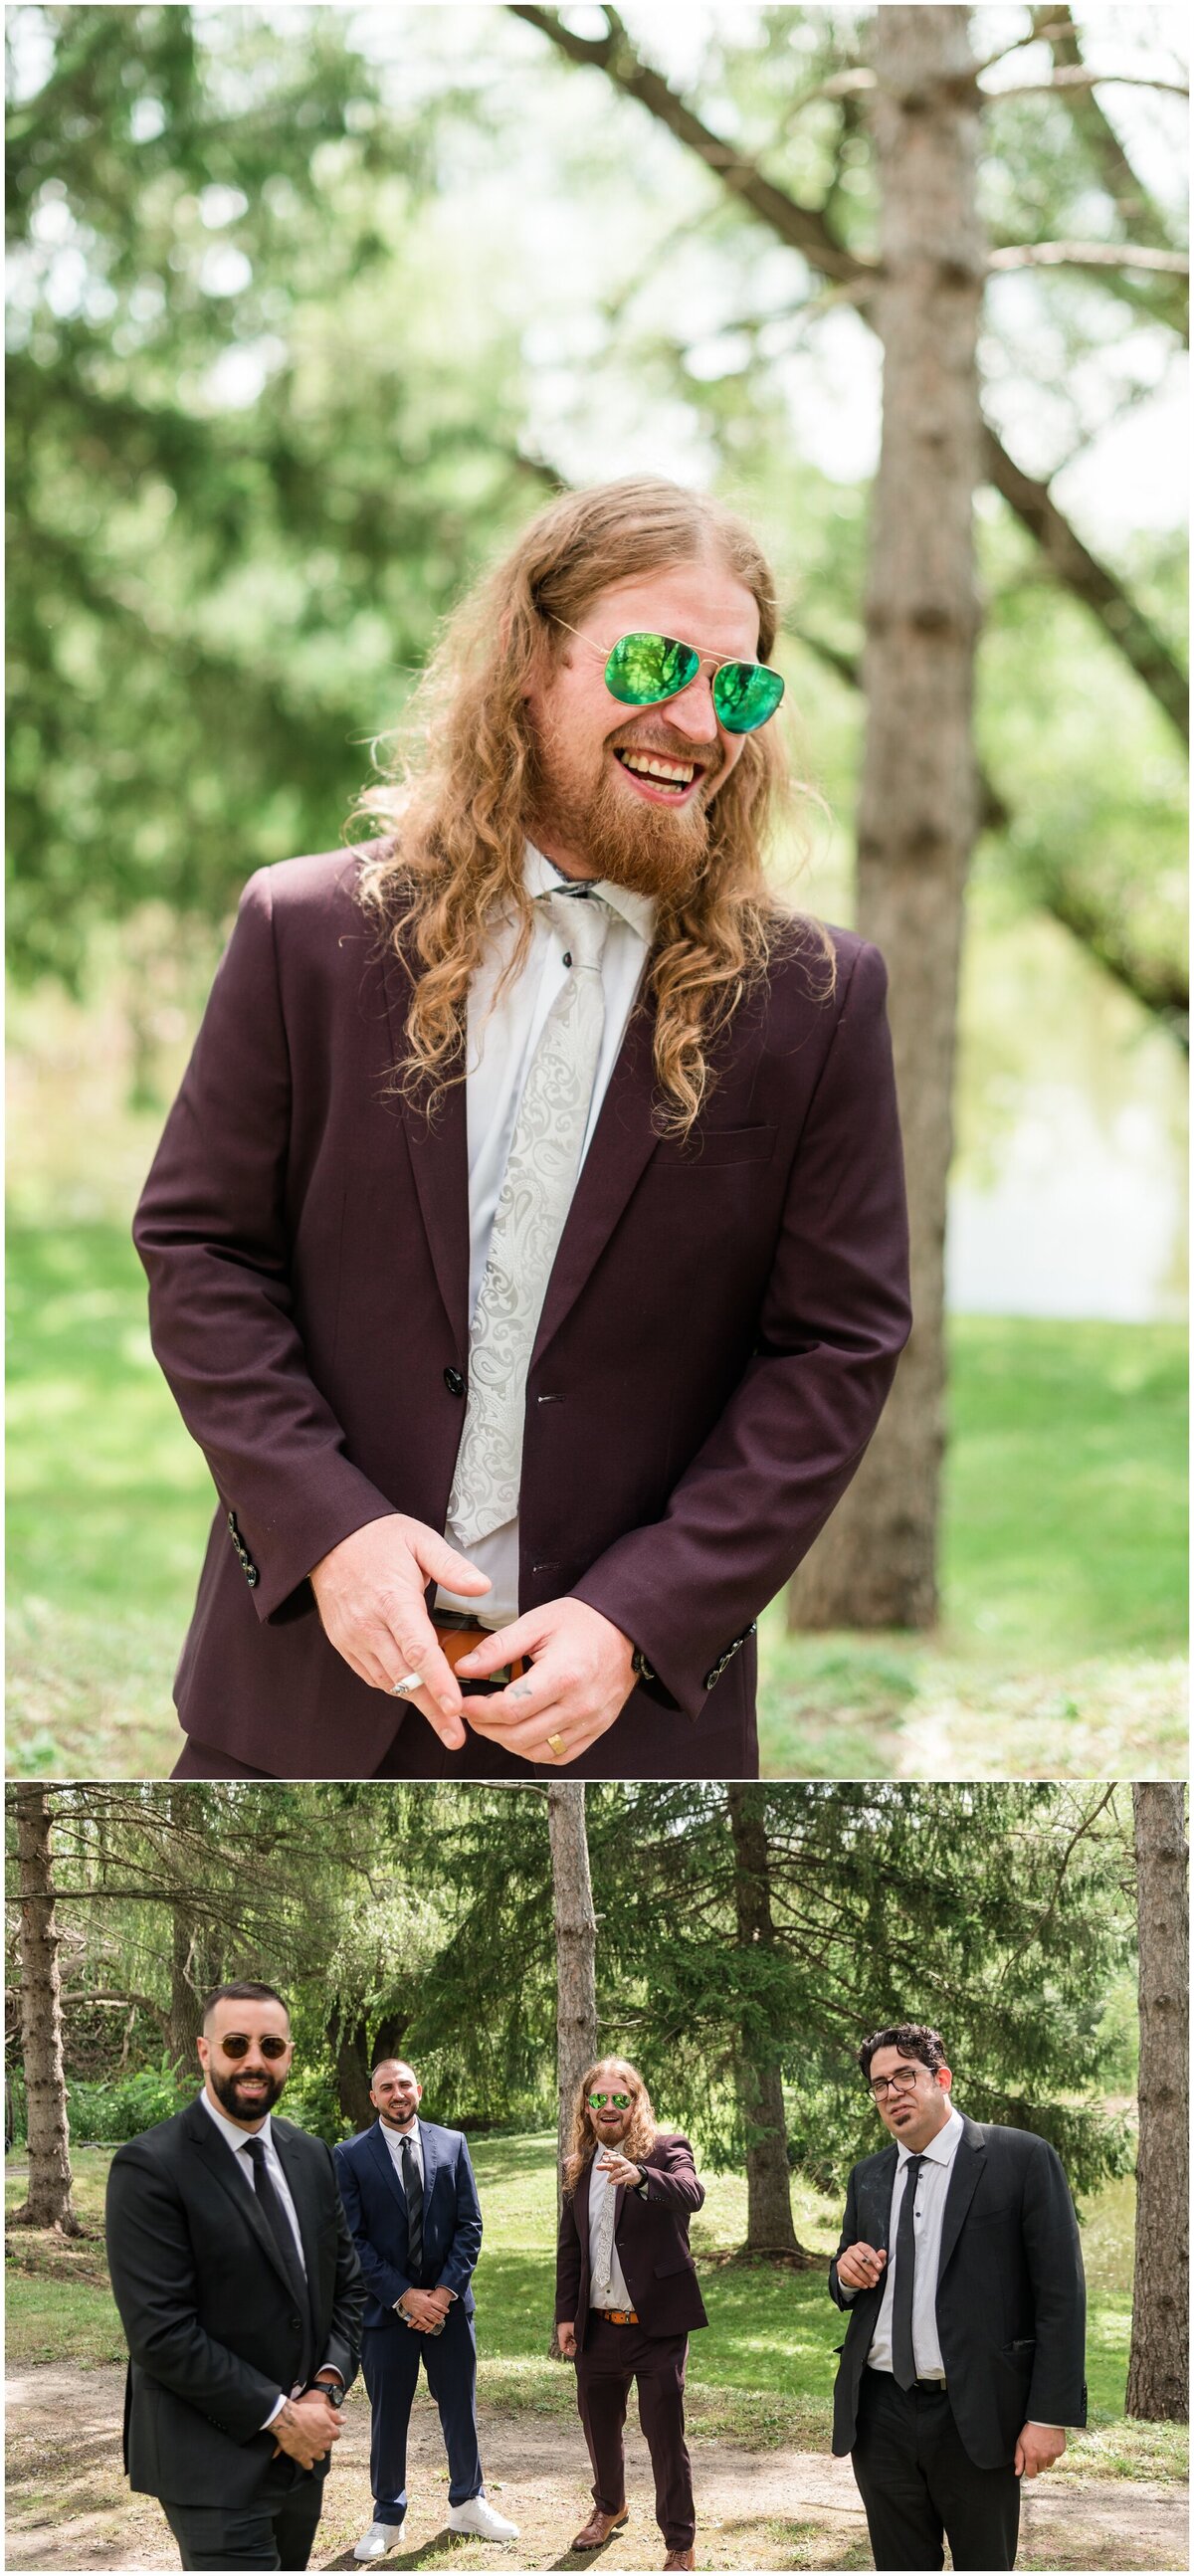 Candid outdoor portrait of the groom wearing his suit, long hair and sunglasses, laughing